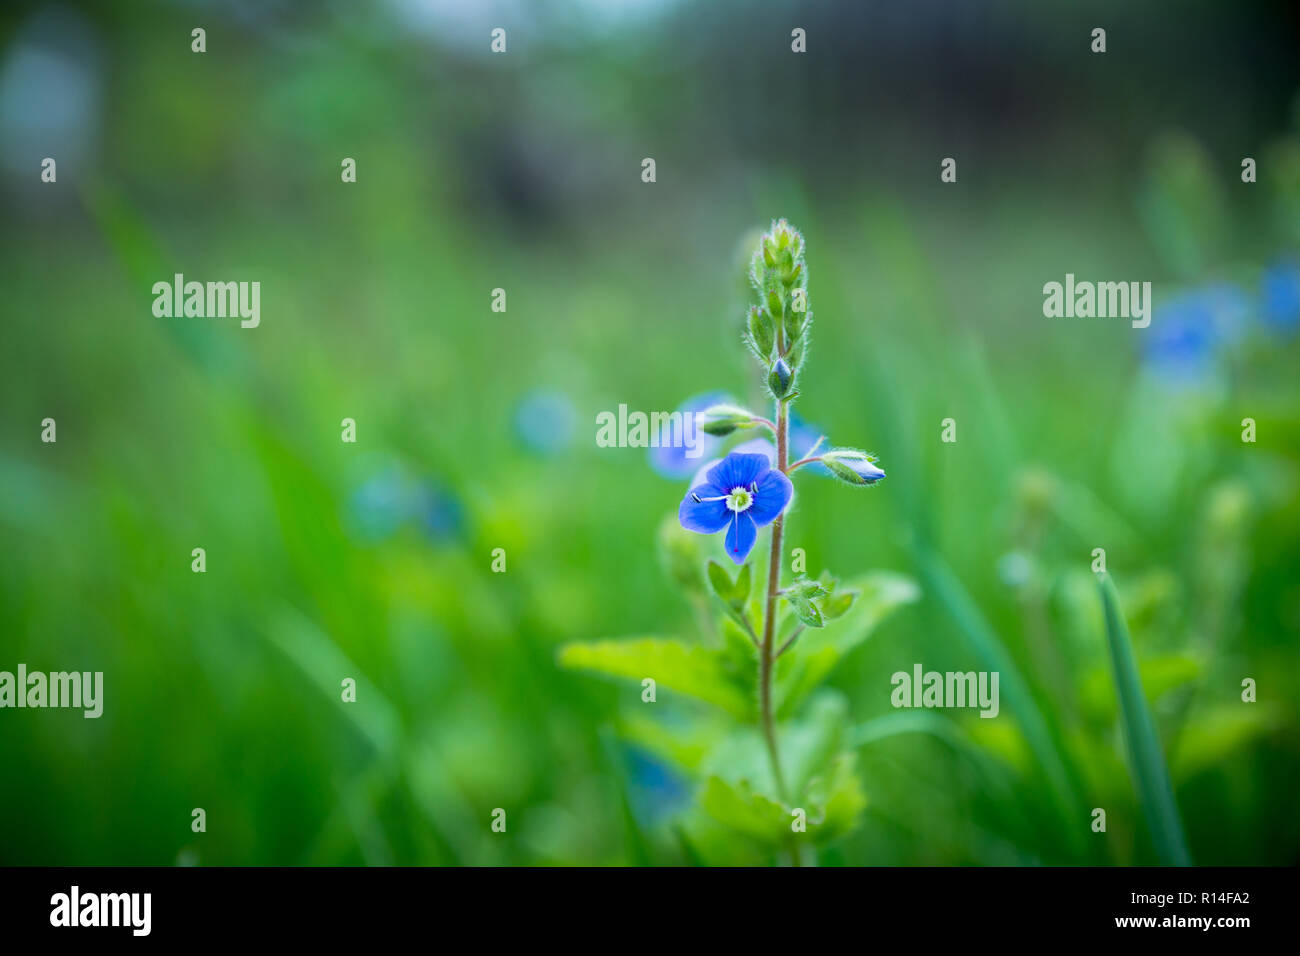 Blooming Veronica Officinalis flower. Shallow depth of field. Stock Photo